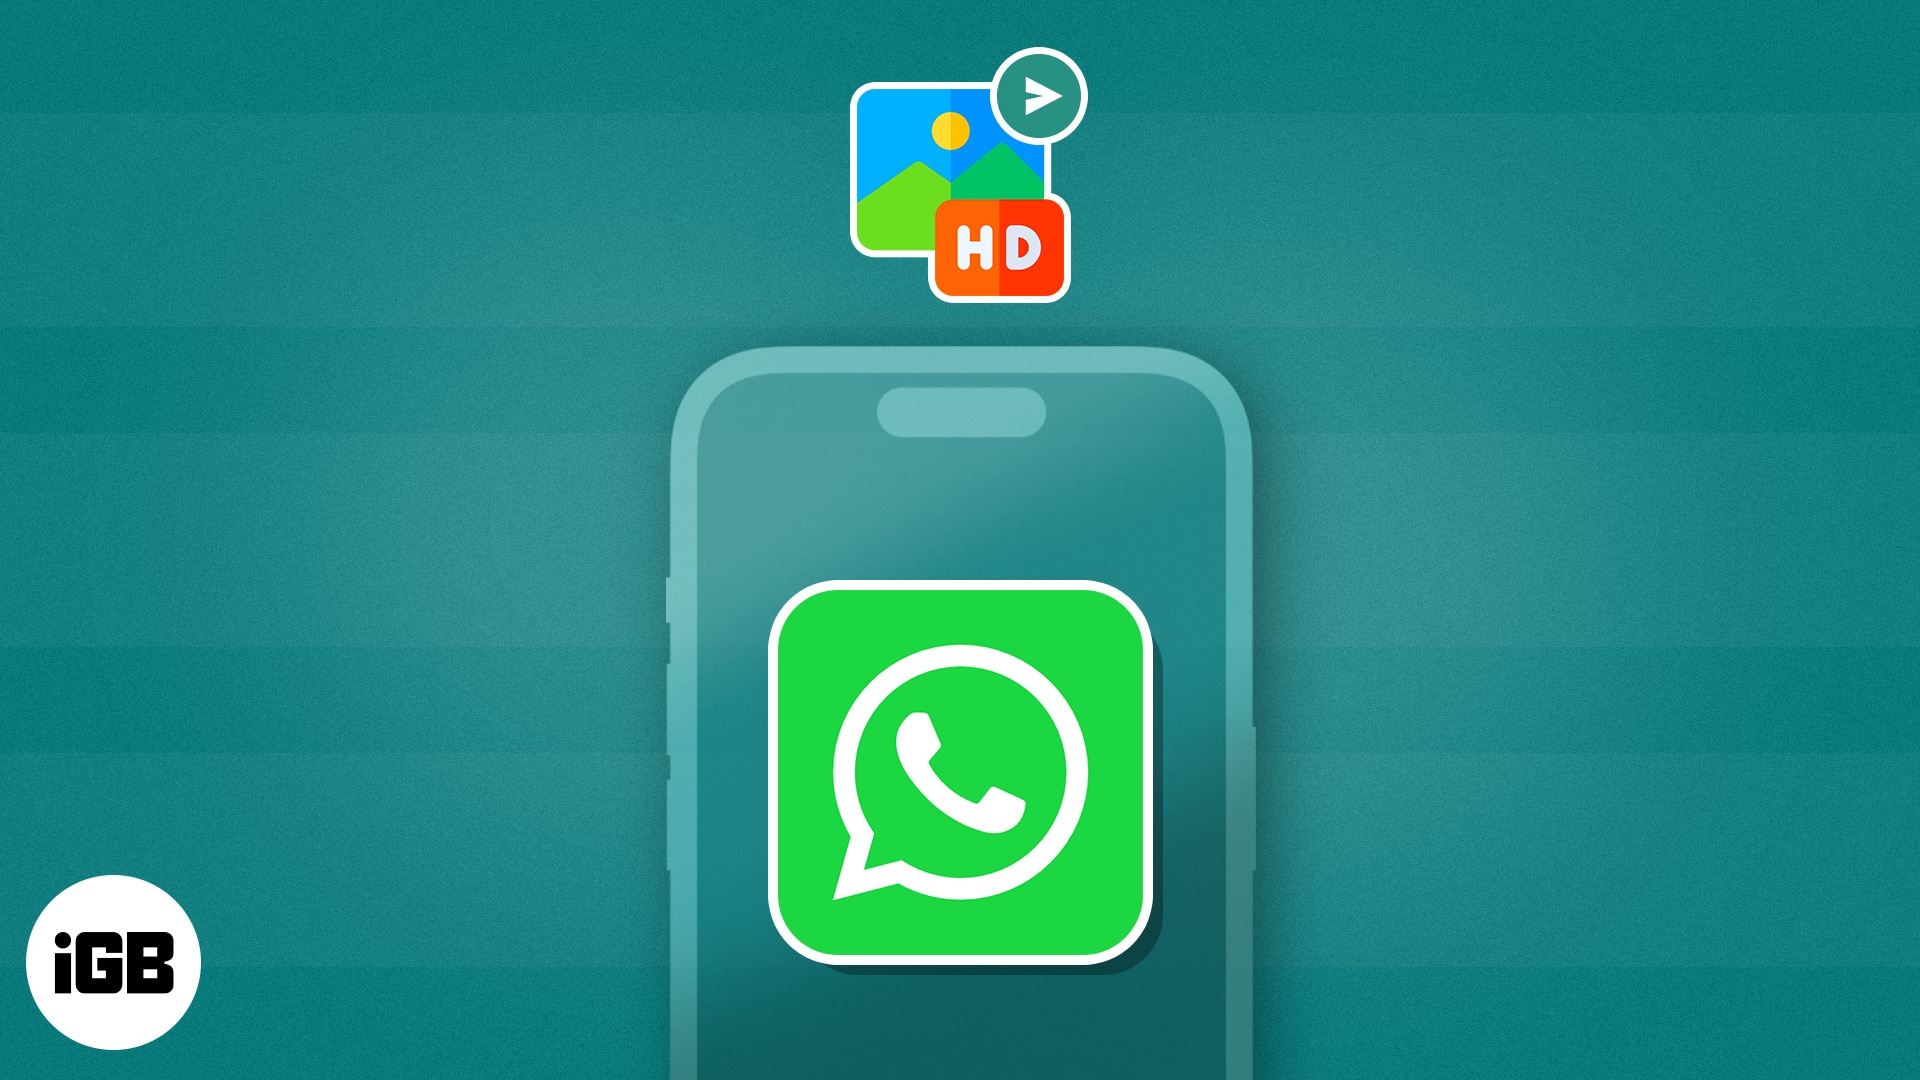 How to send HD photos in WhatsApp on iPhone and Mac